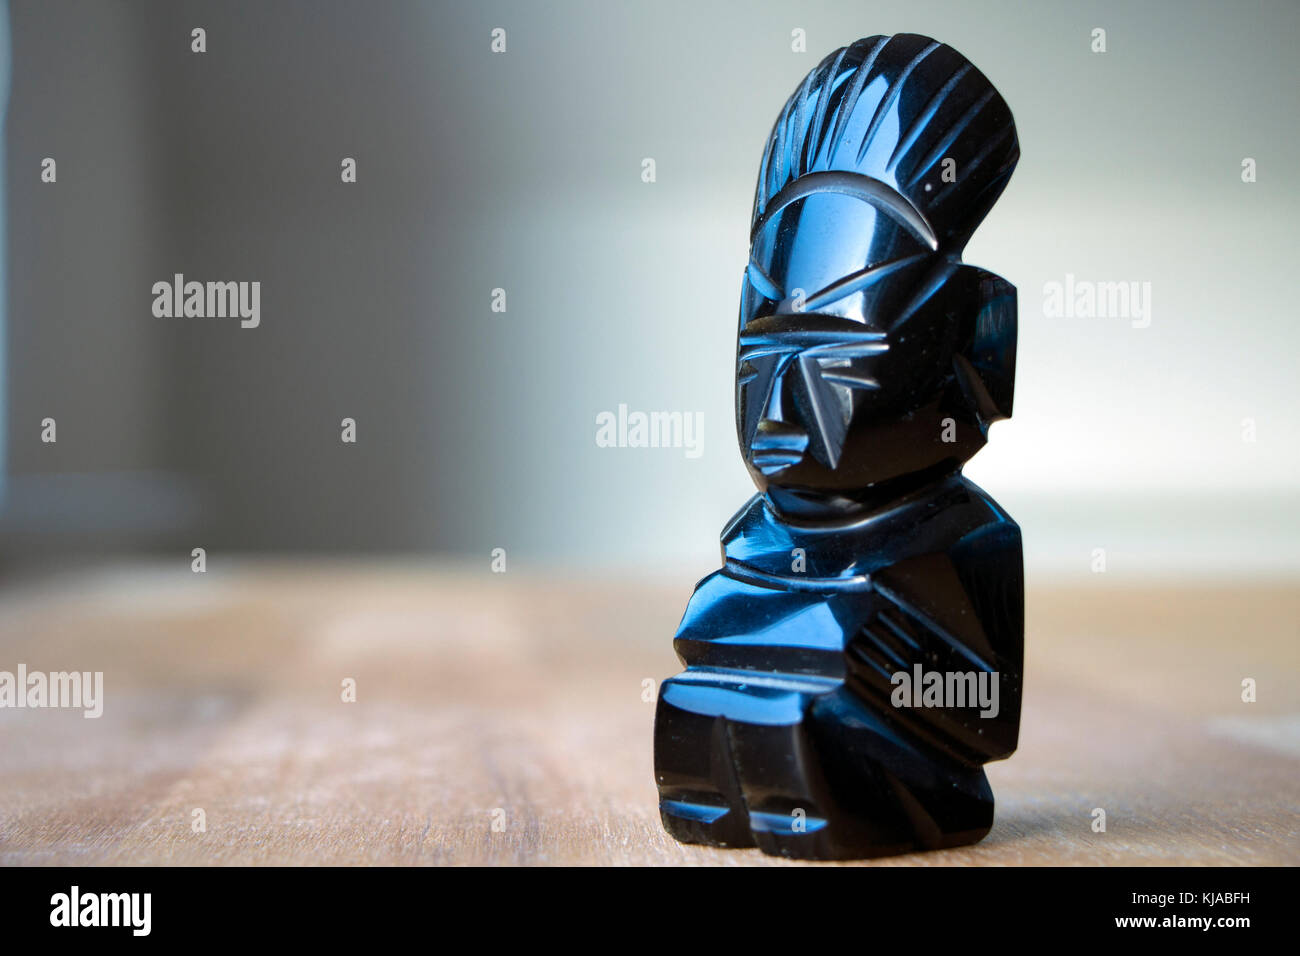 An aztec obsidian ancient statuette on wooden table in sunlight. Stock Photo